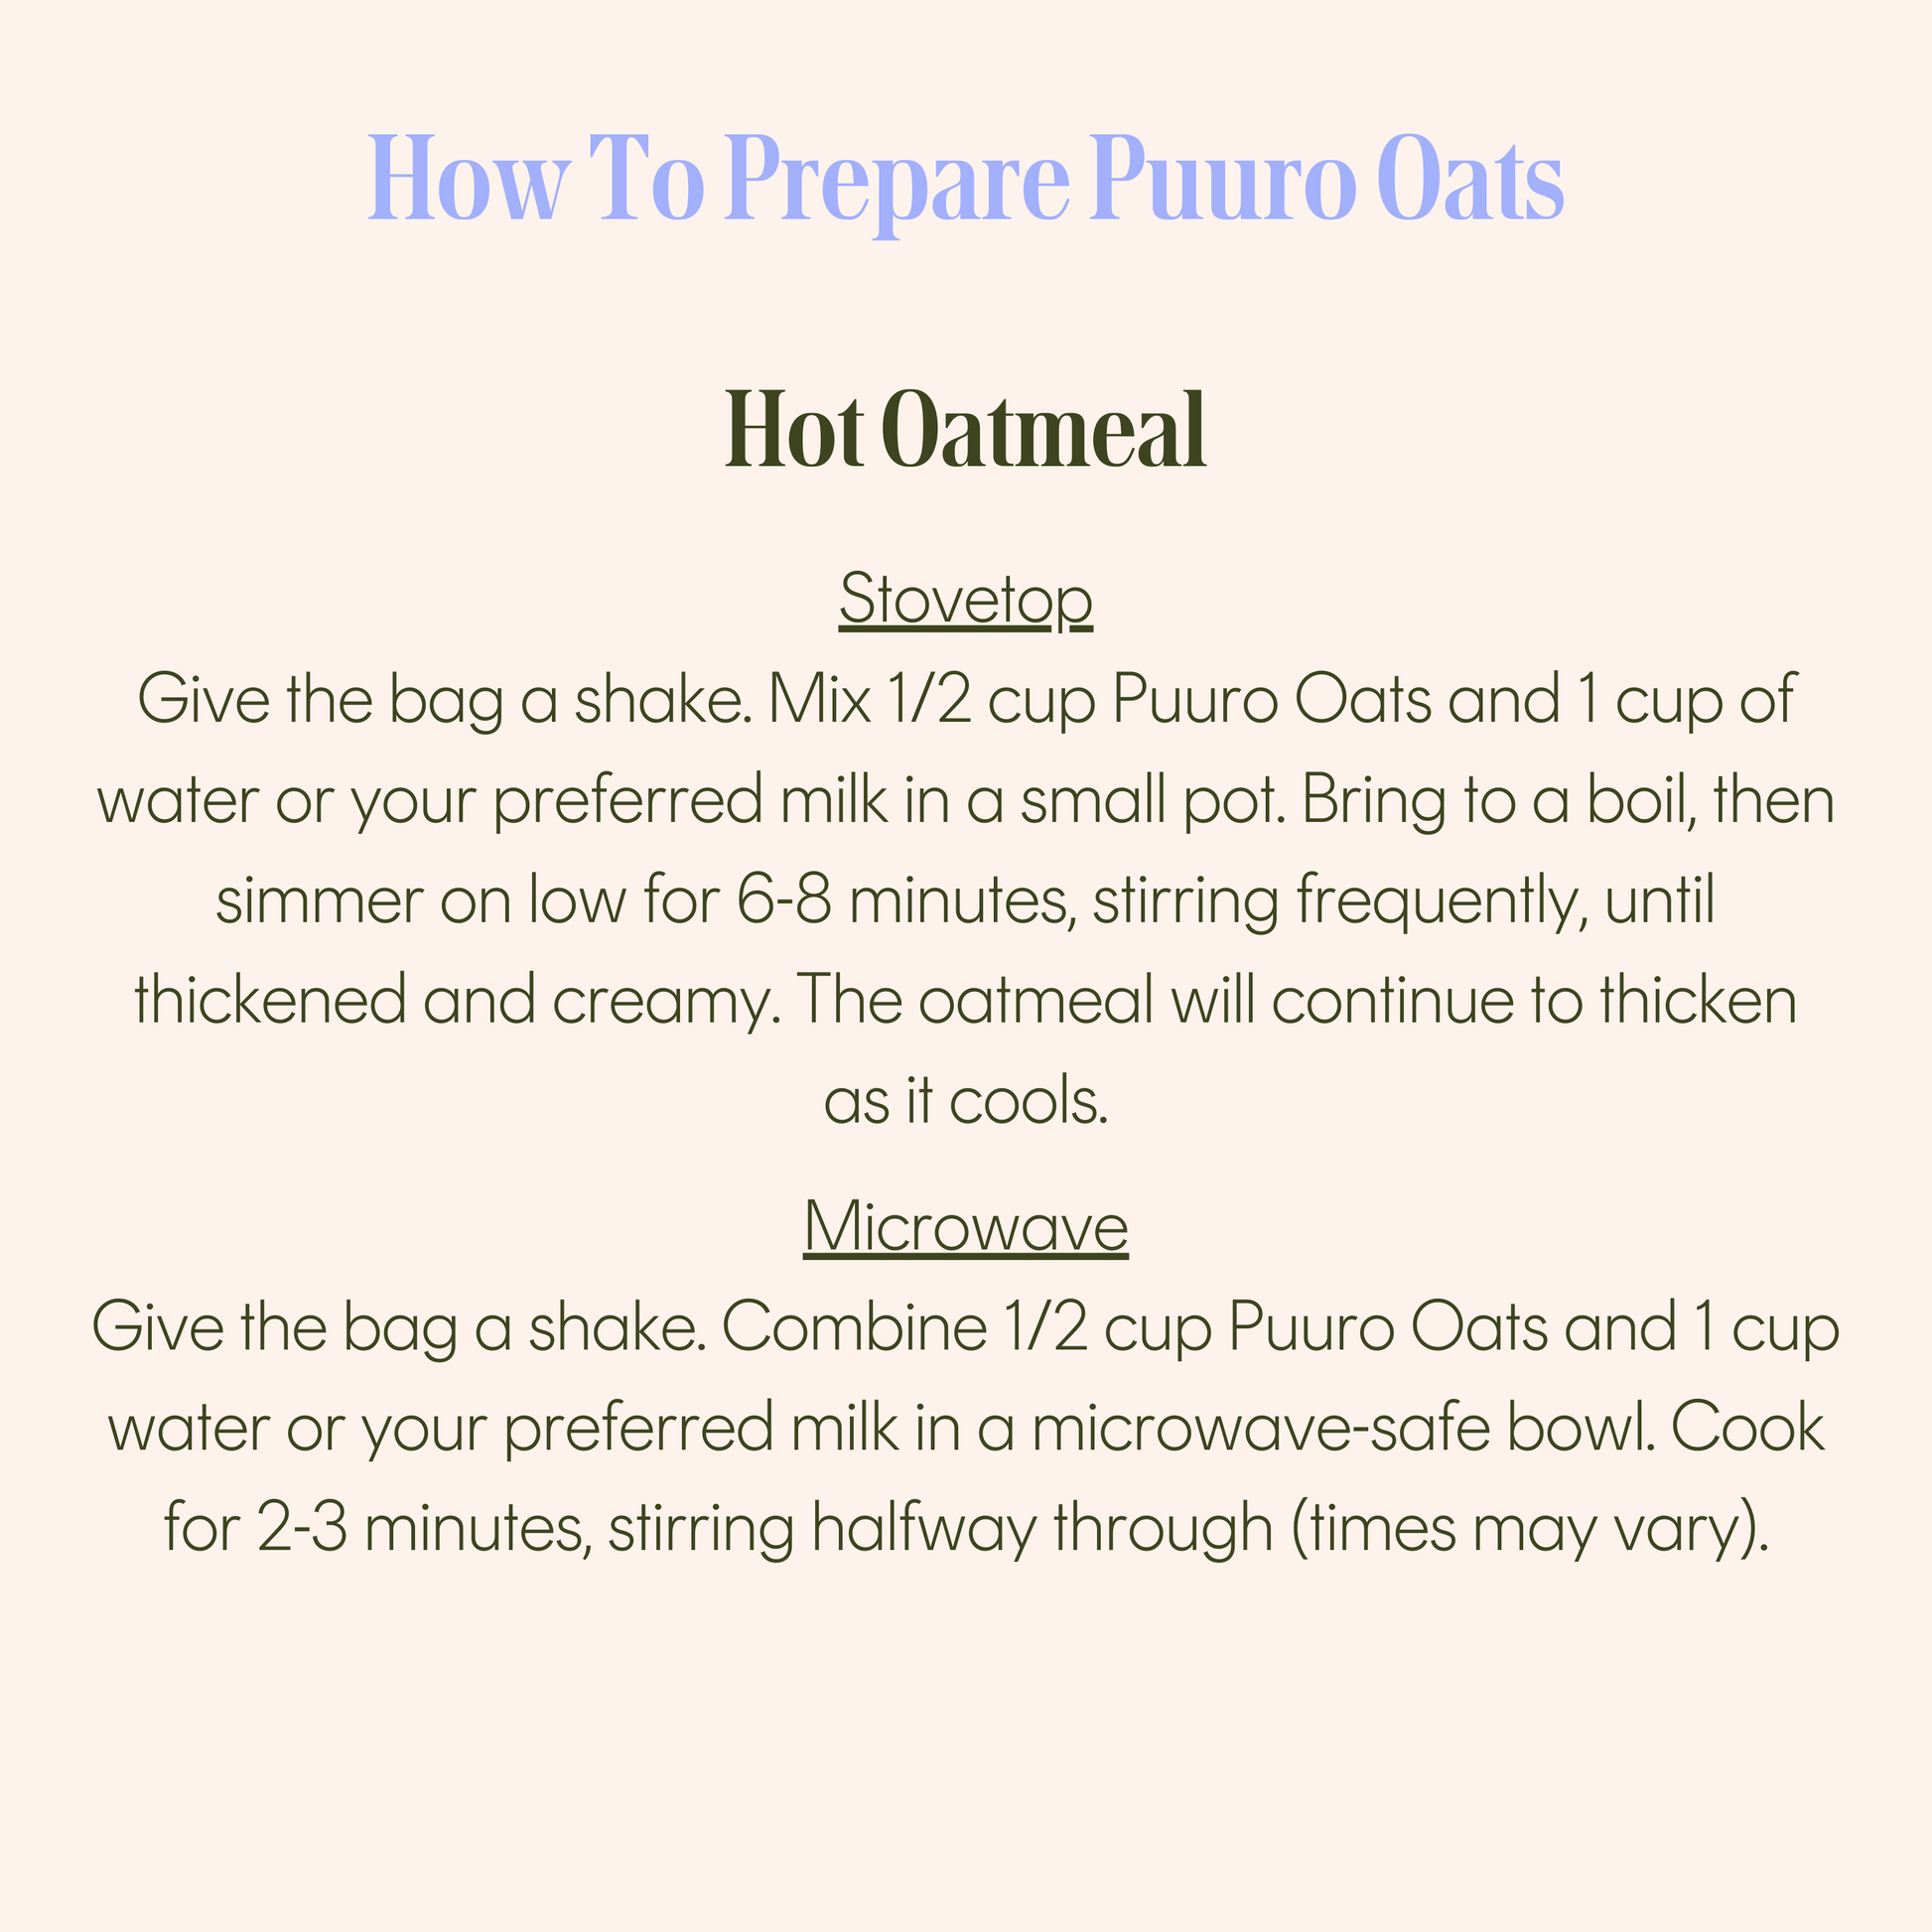 Instructions on how to prepare Puuro Oats as hot oatmeal